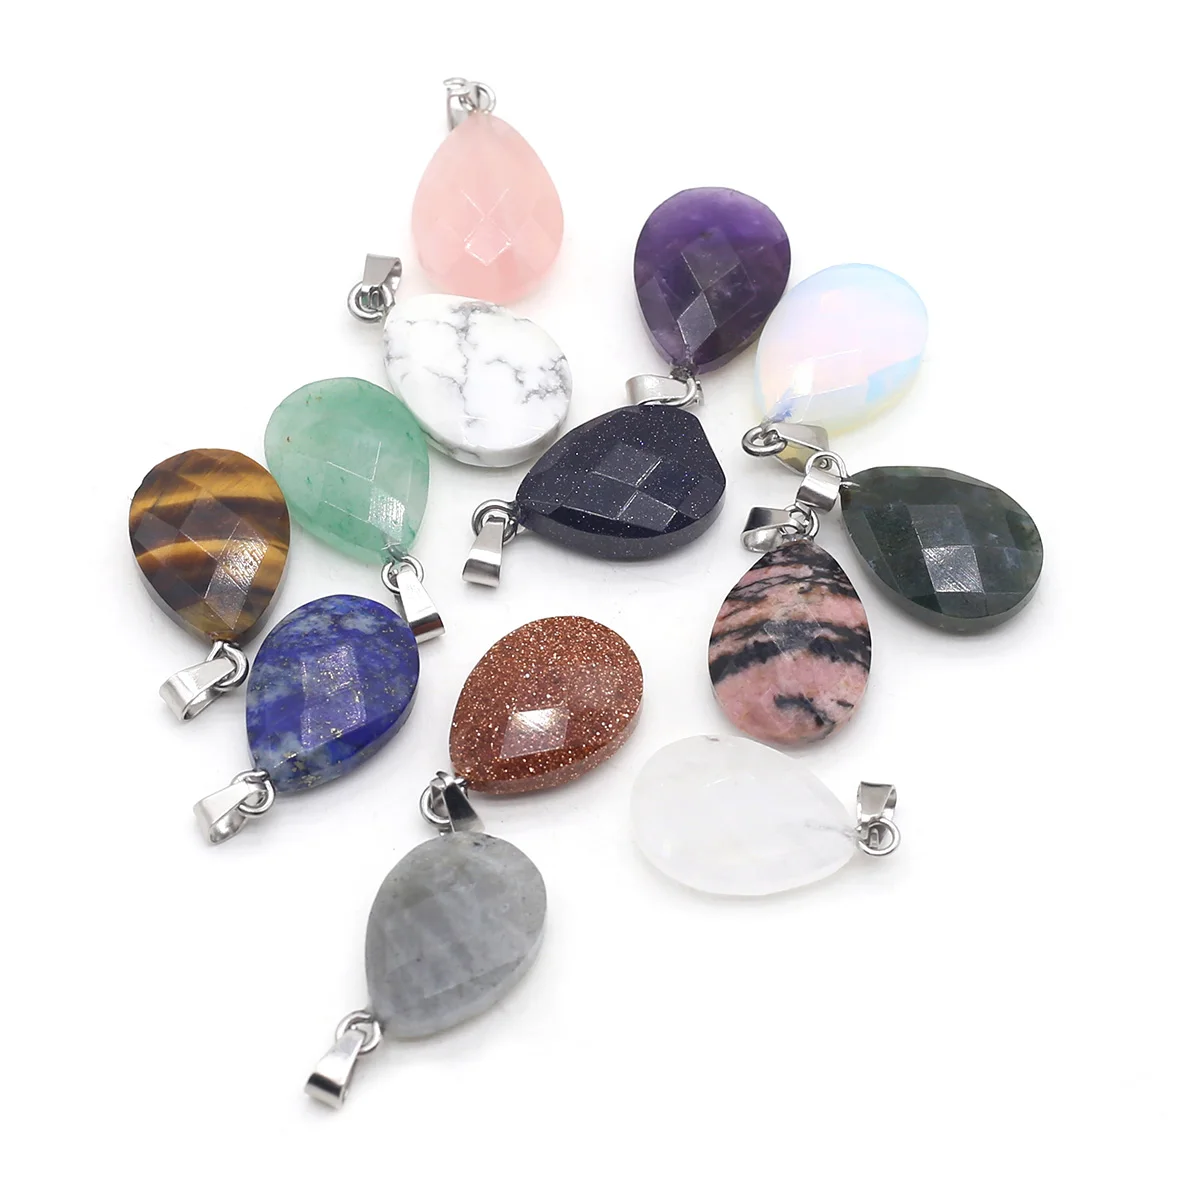 

Natural Stone Pendants Waterdrop Shape Faceted Crystal Quartz Agate Charms for Jewelry Making Necklace